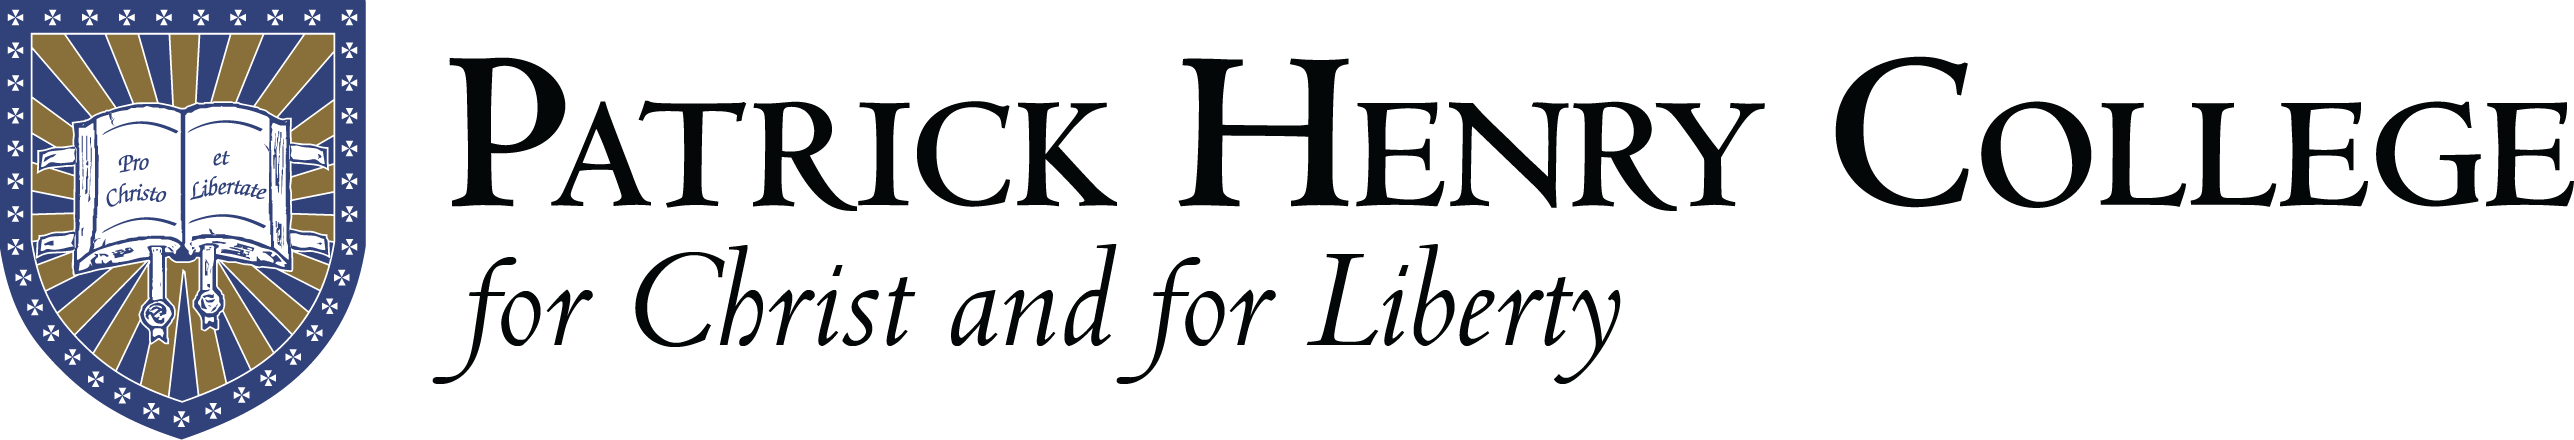 Patrick Henry College // for Christ and for Liberty